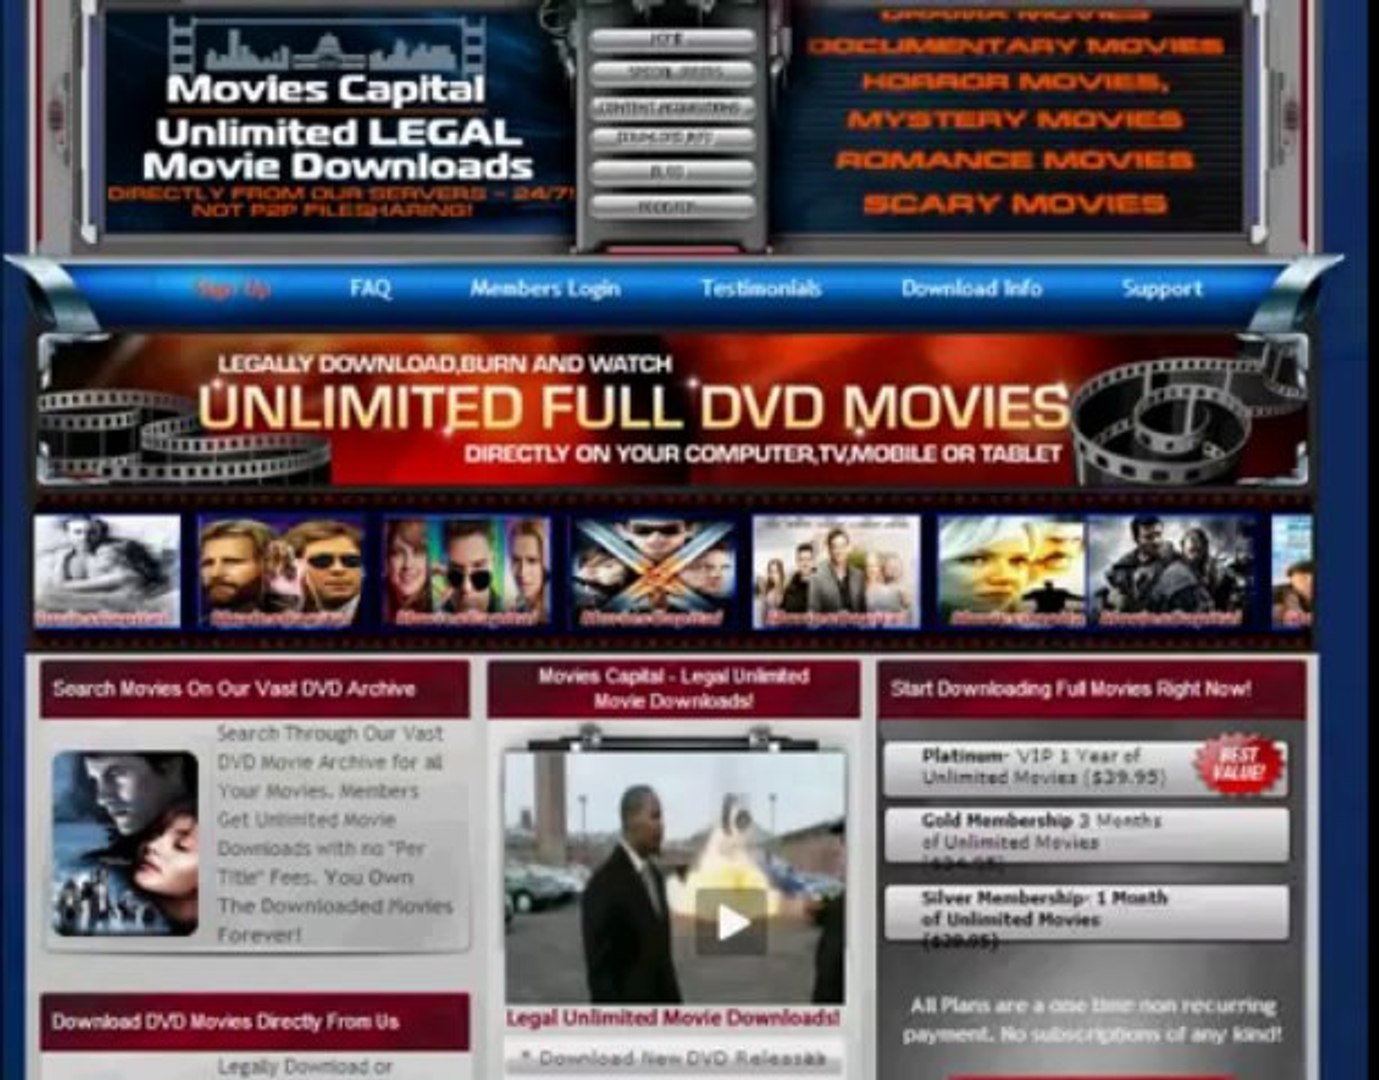 movies capital - movies free online